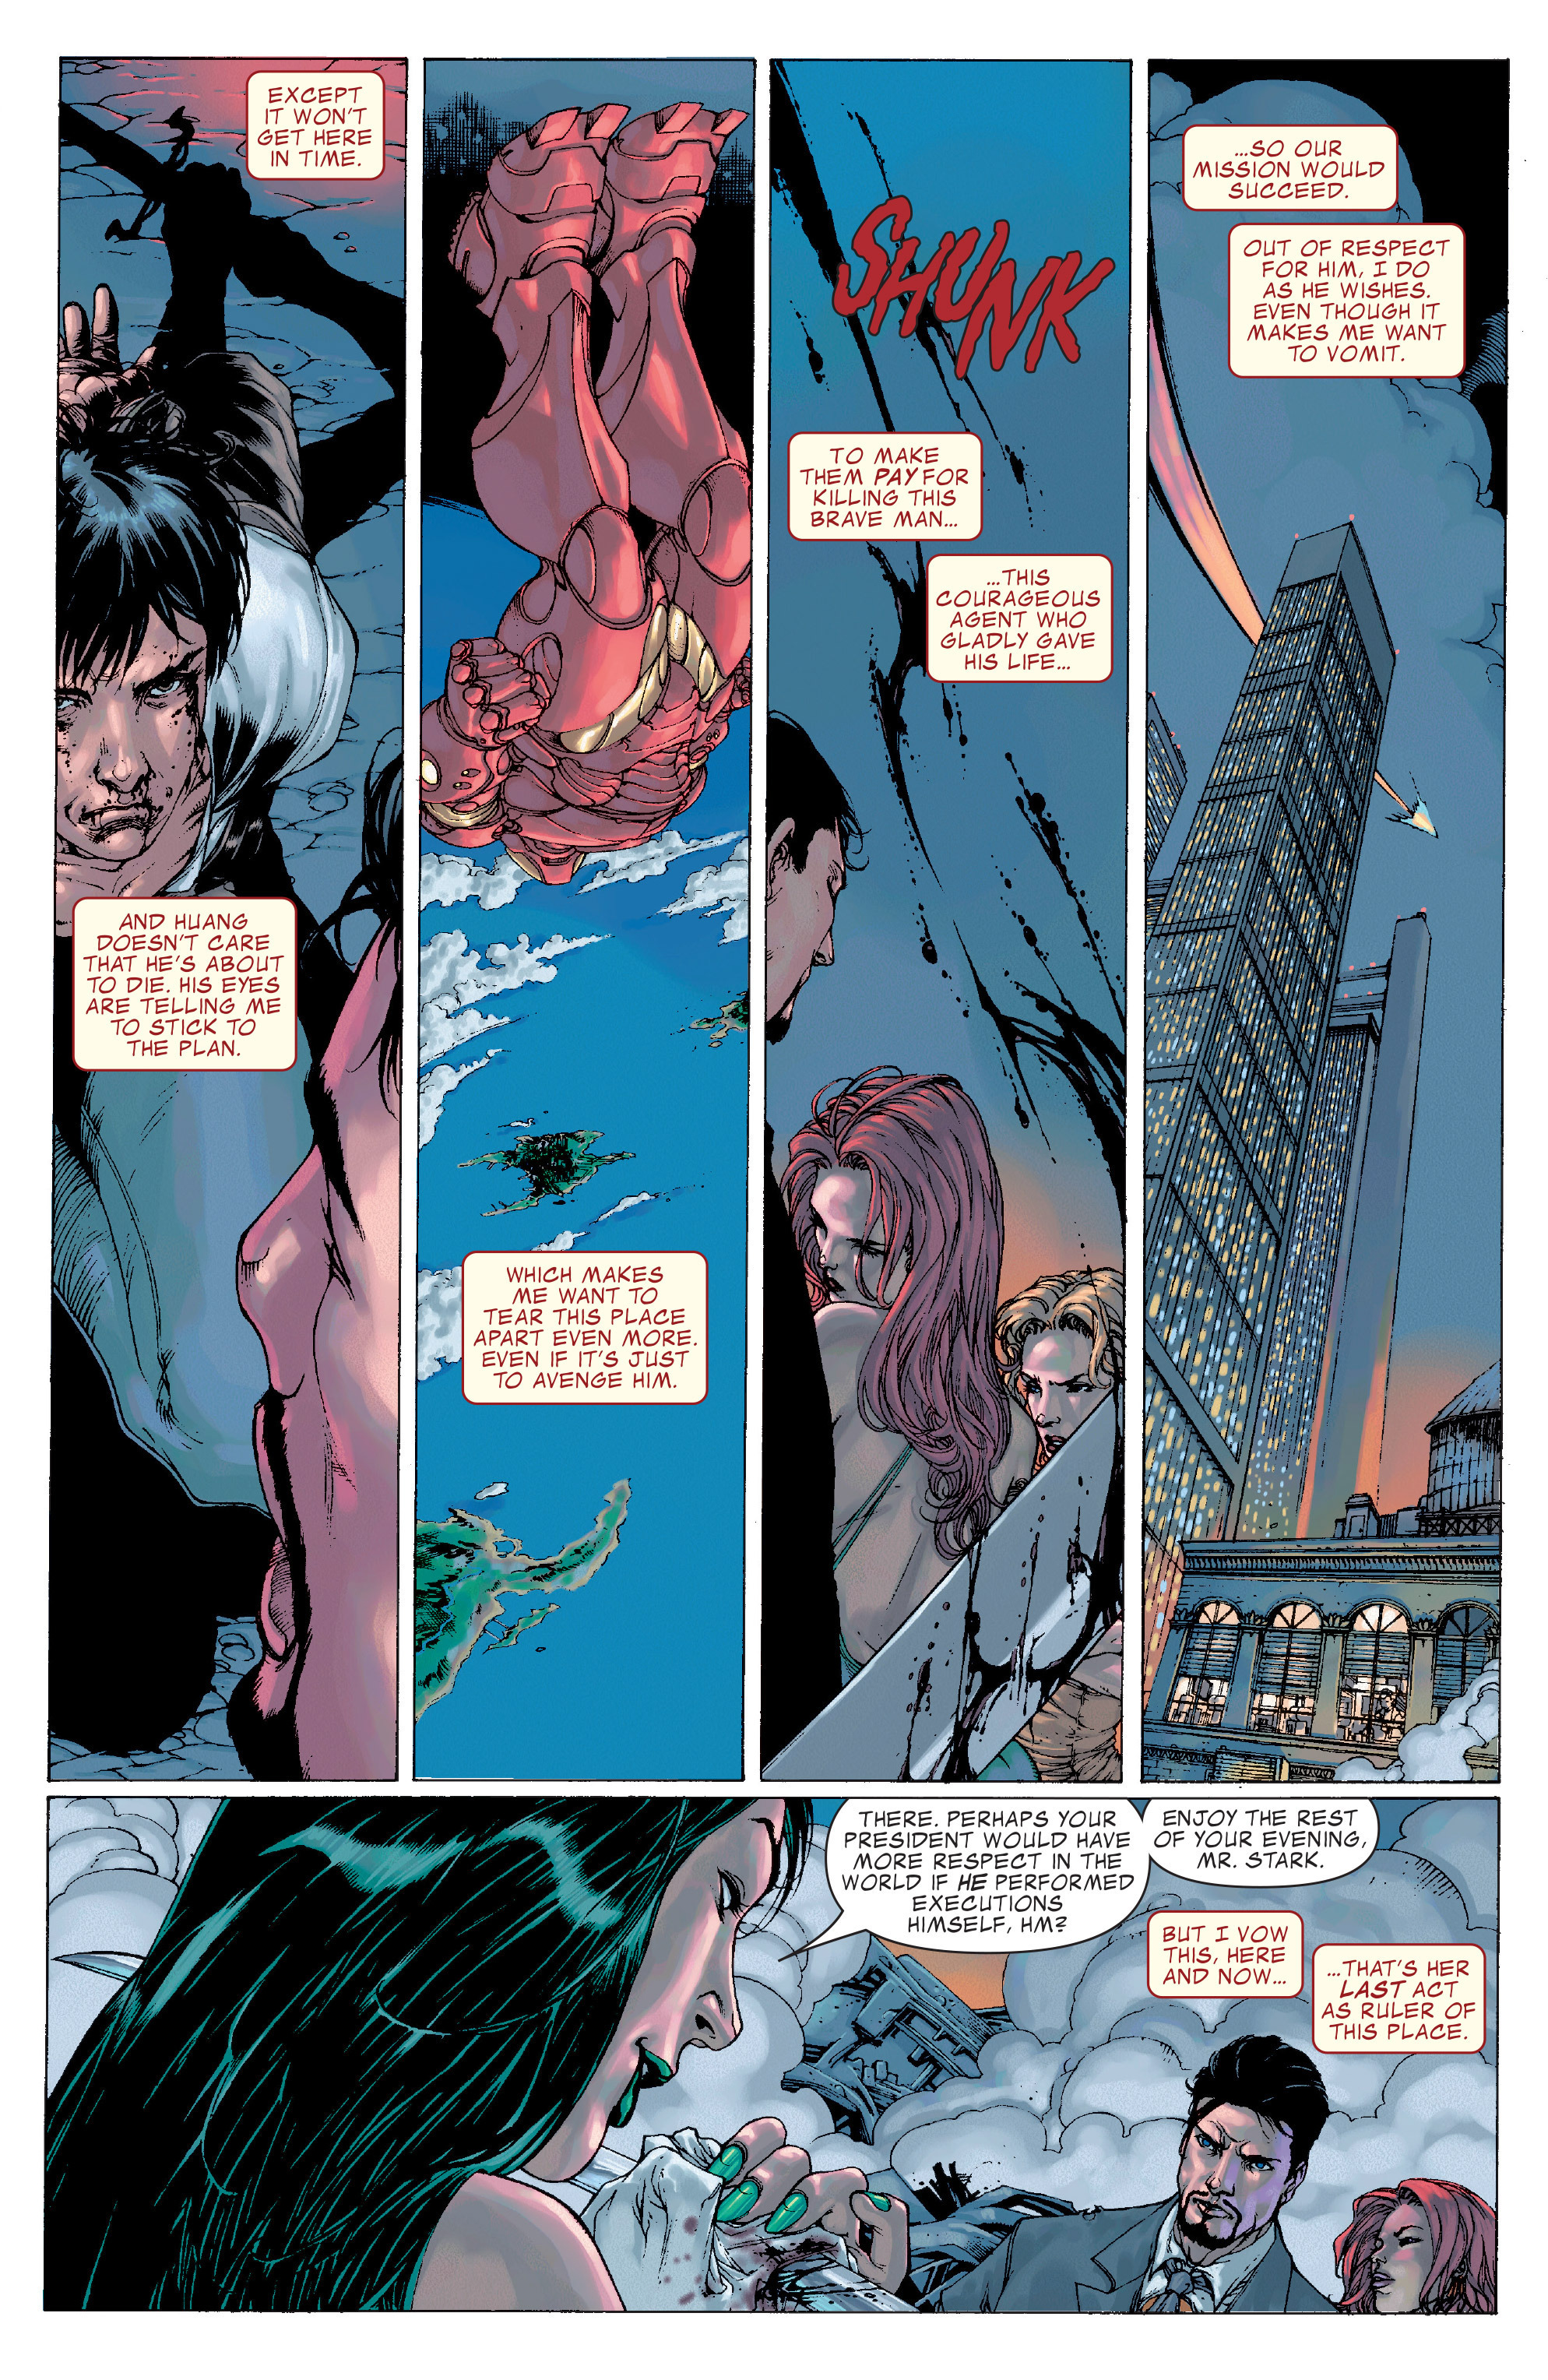 Iron Man: Director of S.H.I.E.L.D. Annual Full Page 19